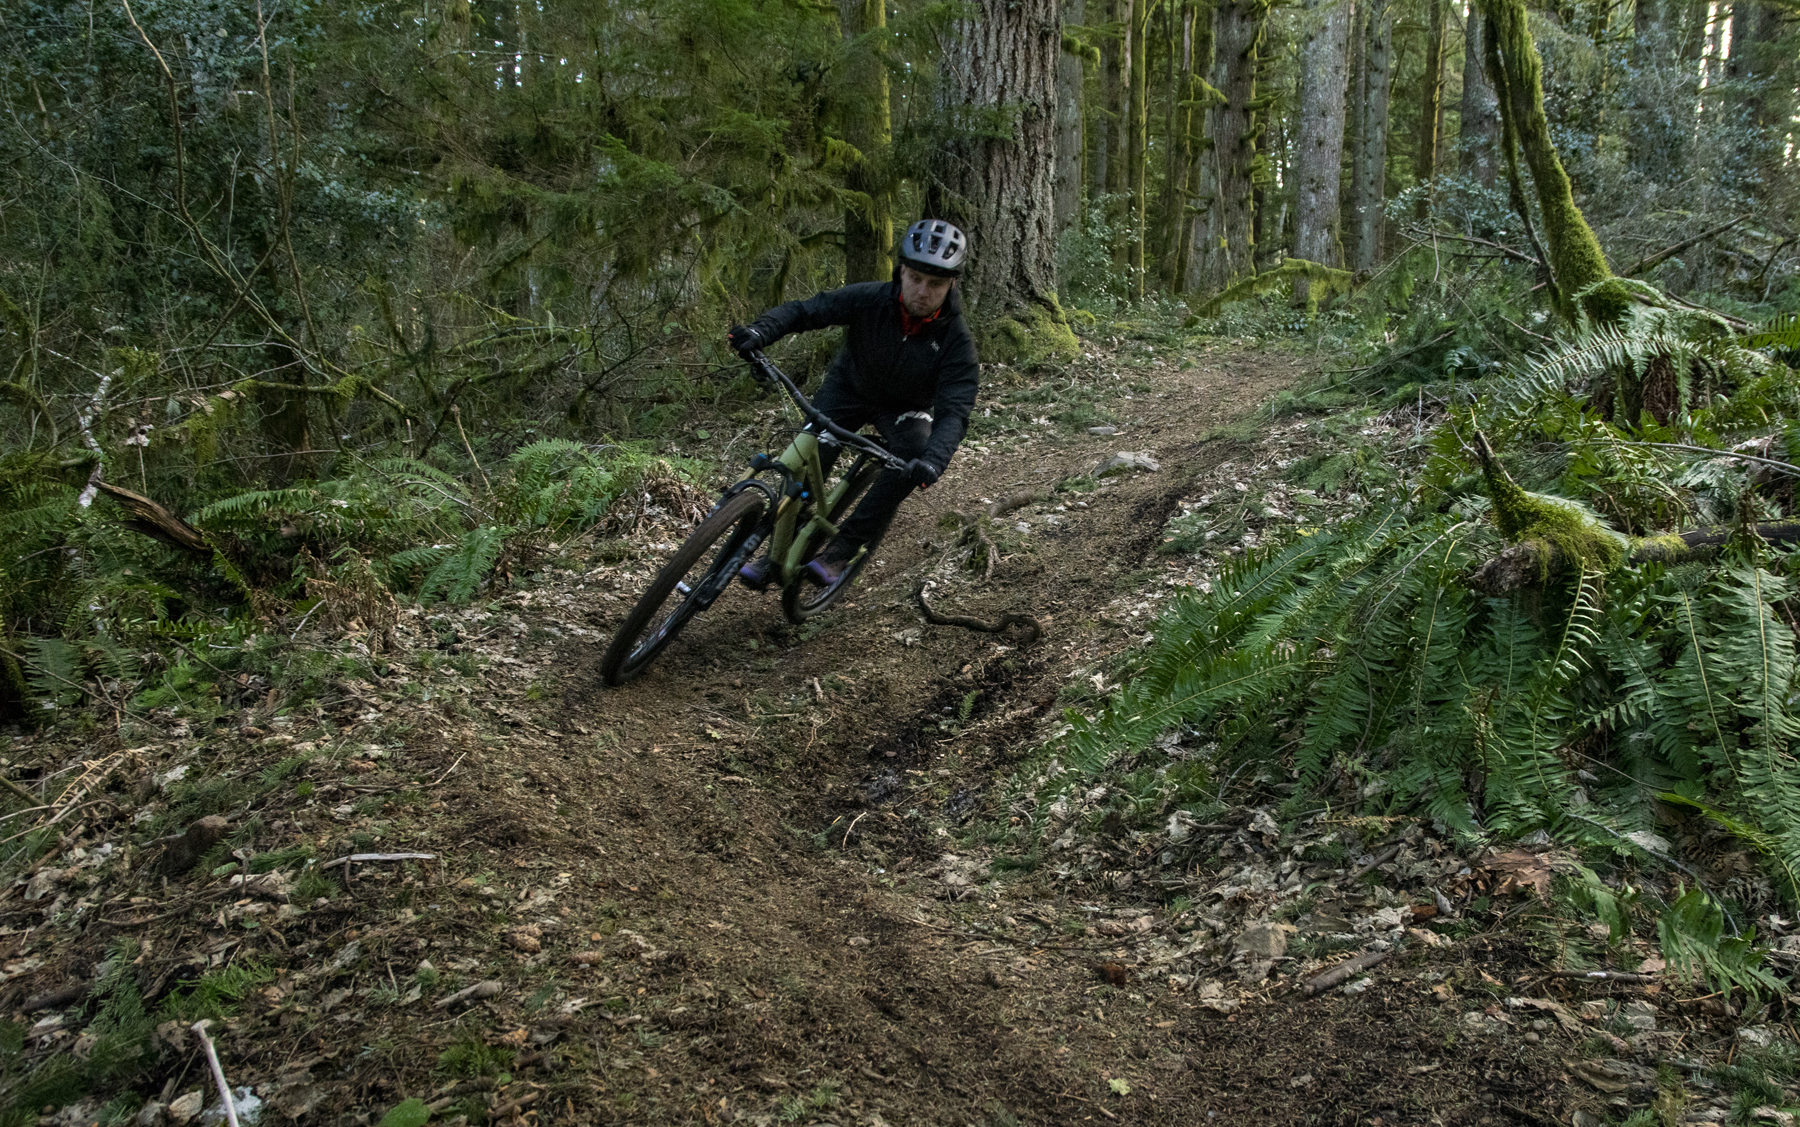 David Golay and Zack Henderson review the Canyon Spectral 125 for Blister